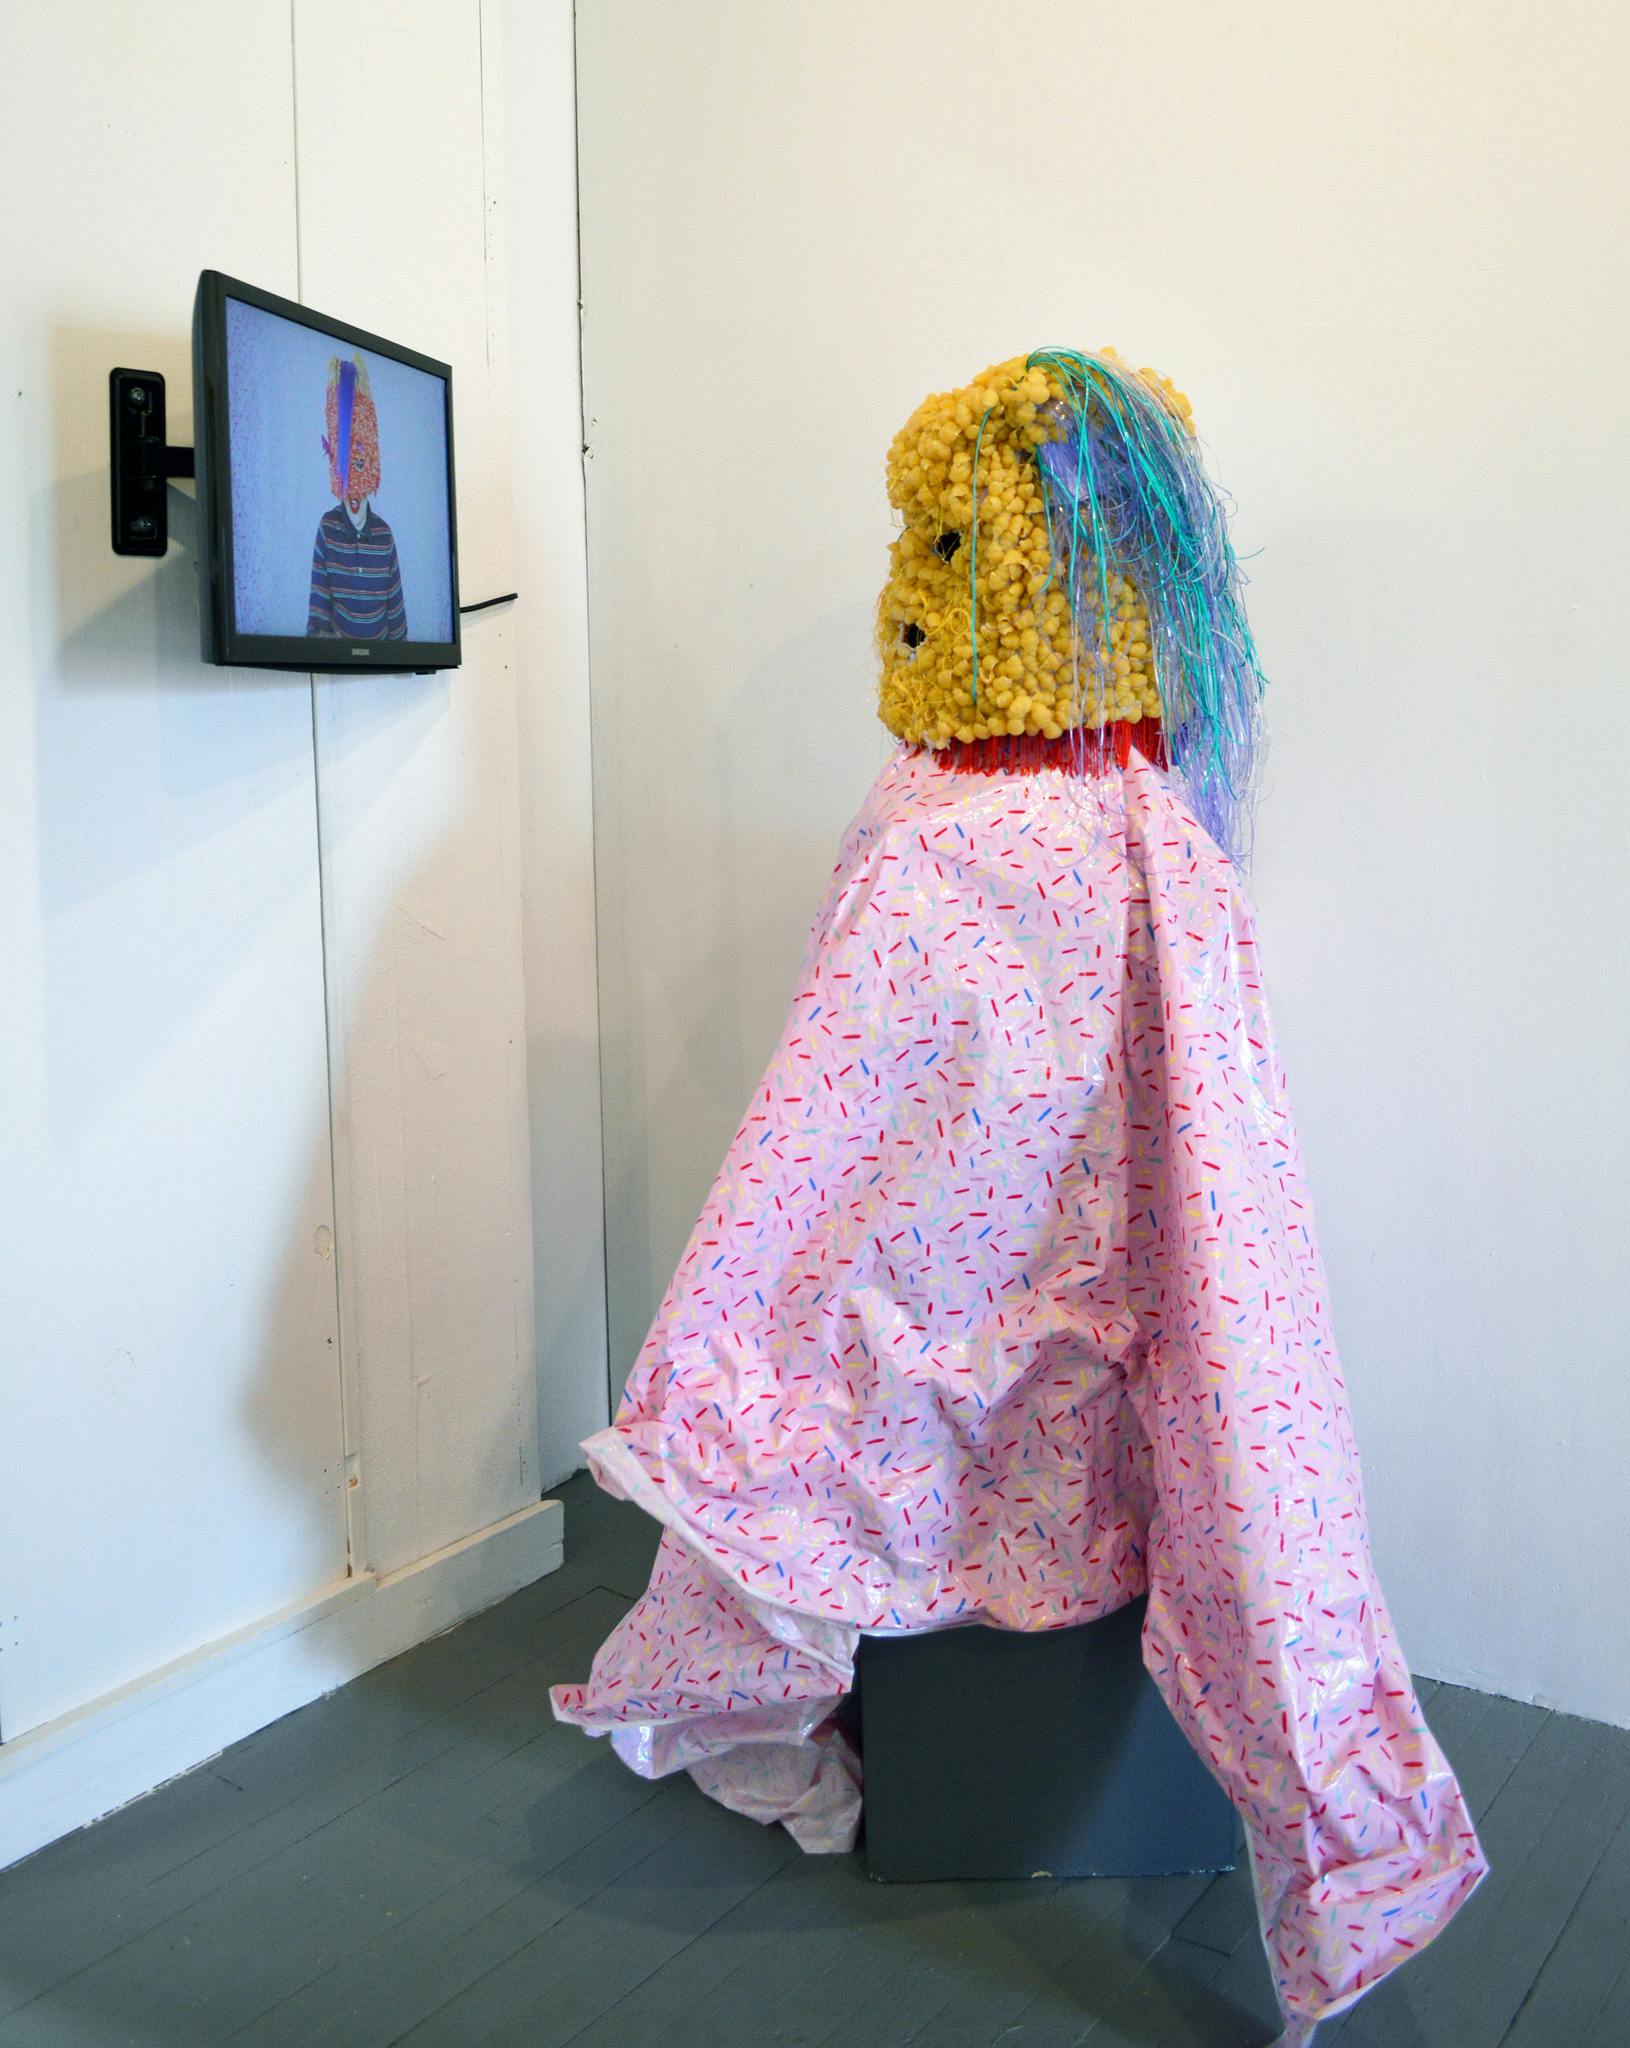 A figure wears a yellow headpiece and a pink smock, while watching a screen positioned on the wall.